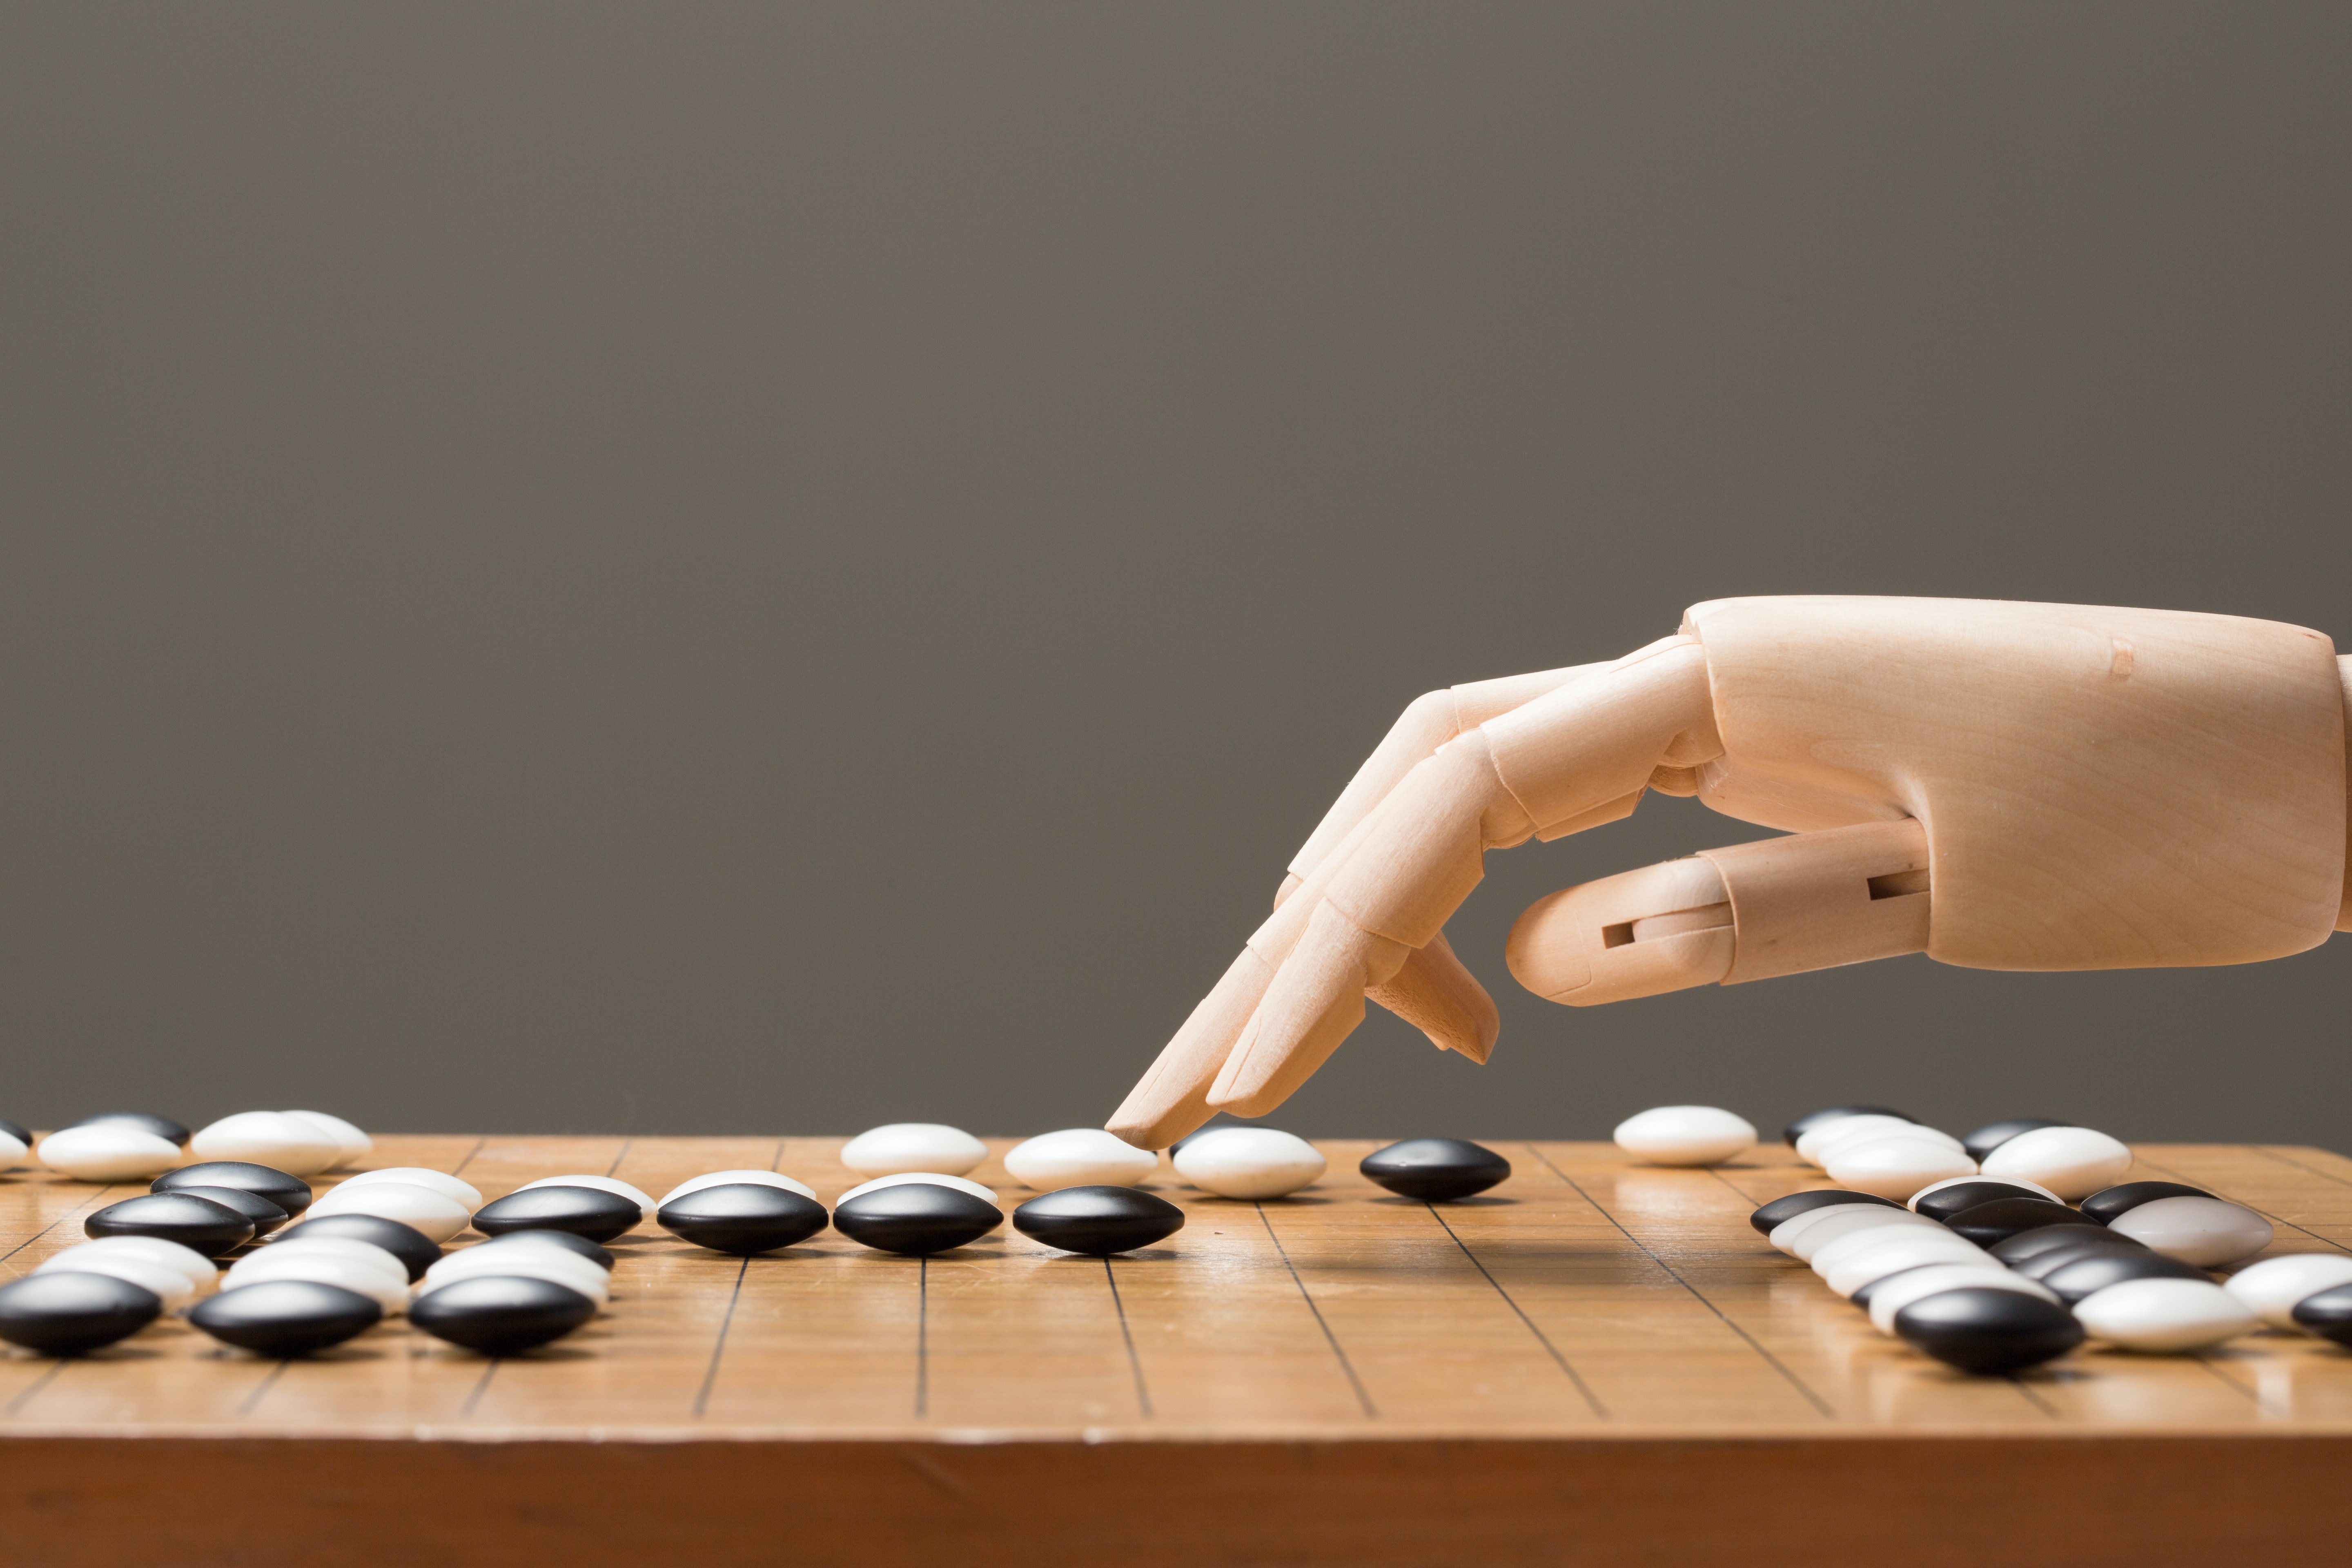 A robot hand playing the ancient Chinese boardgame called Go